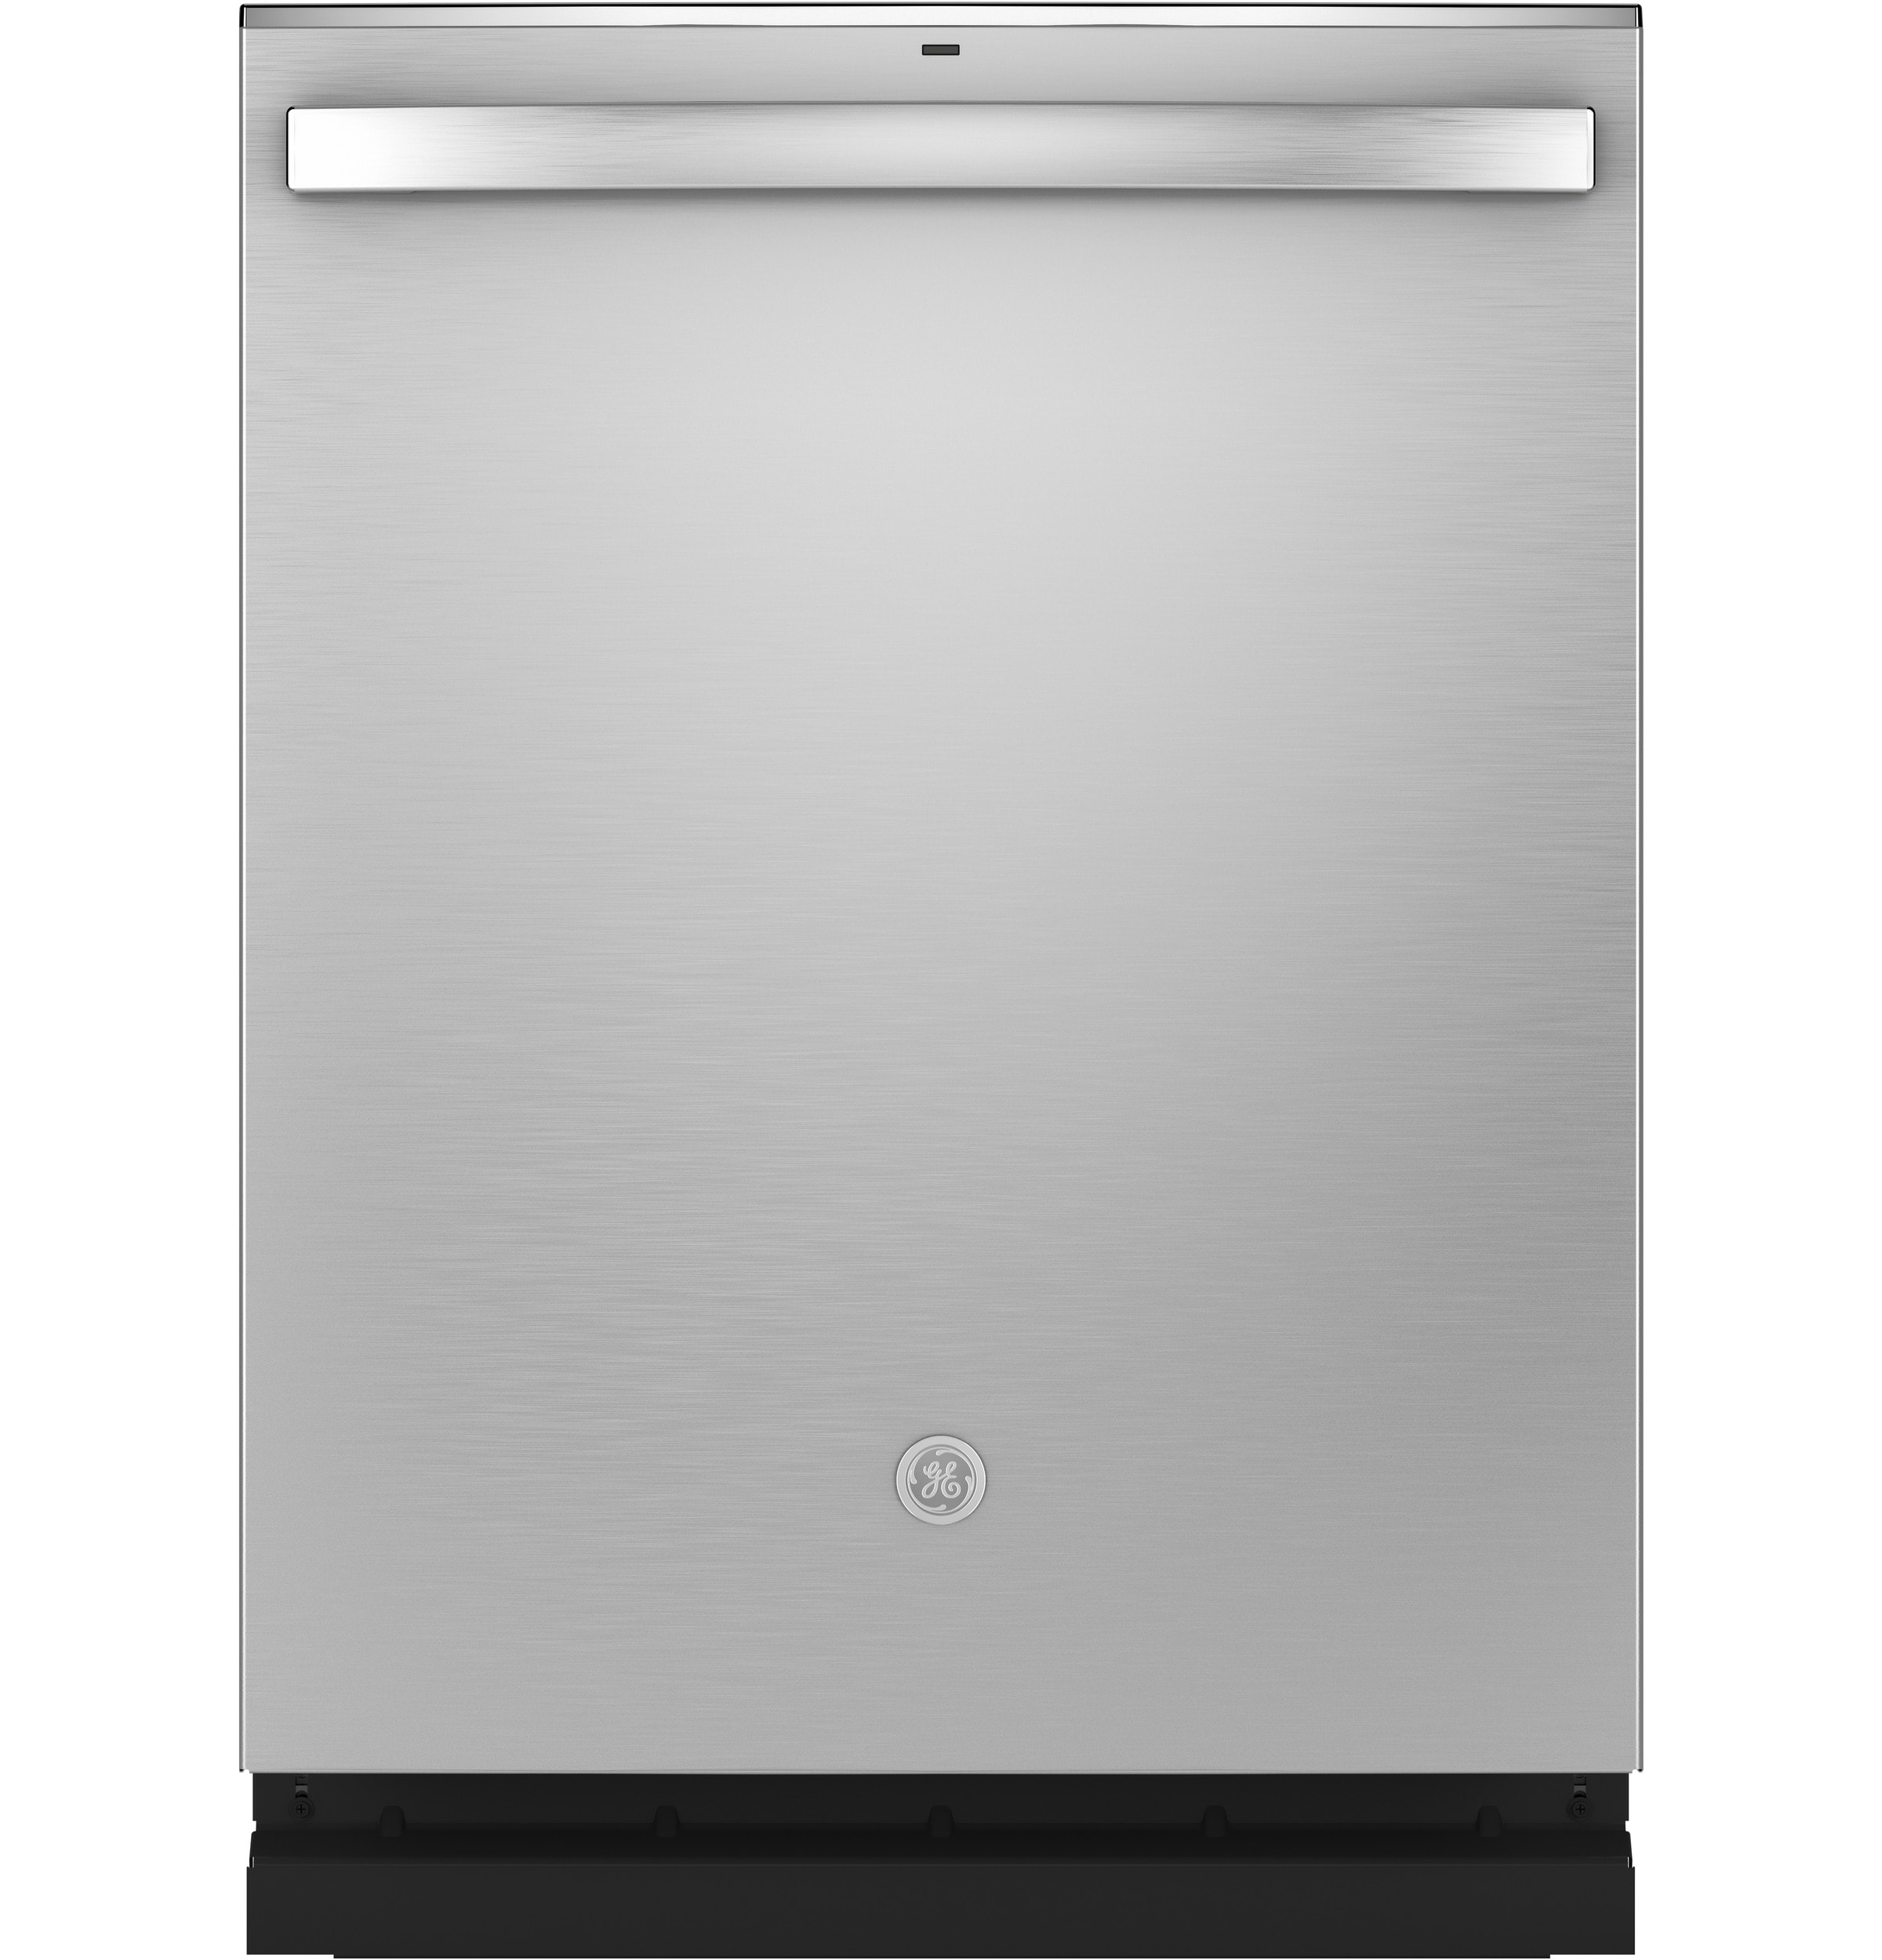 GE 24 in. Slate Top Control Built-In Tall Tub Dishwasher with Dry